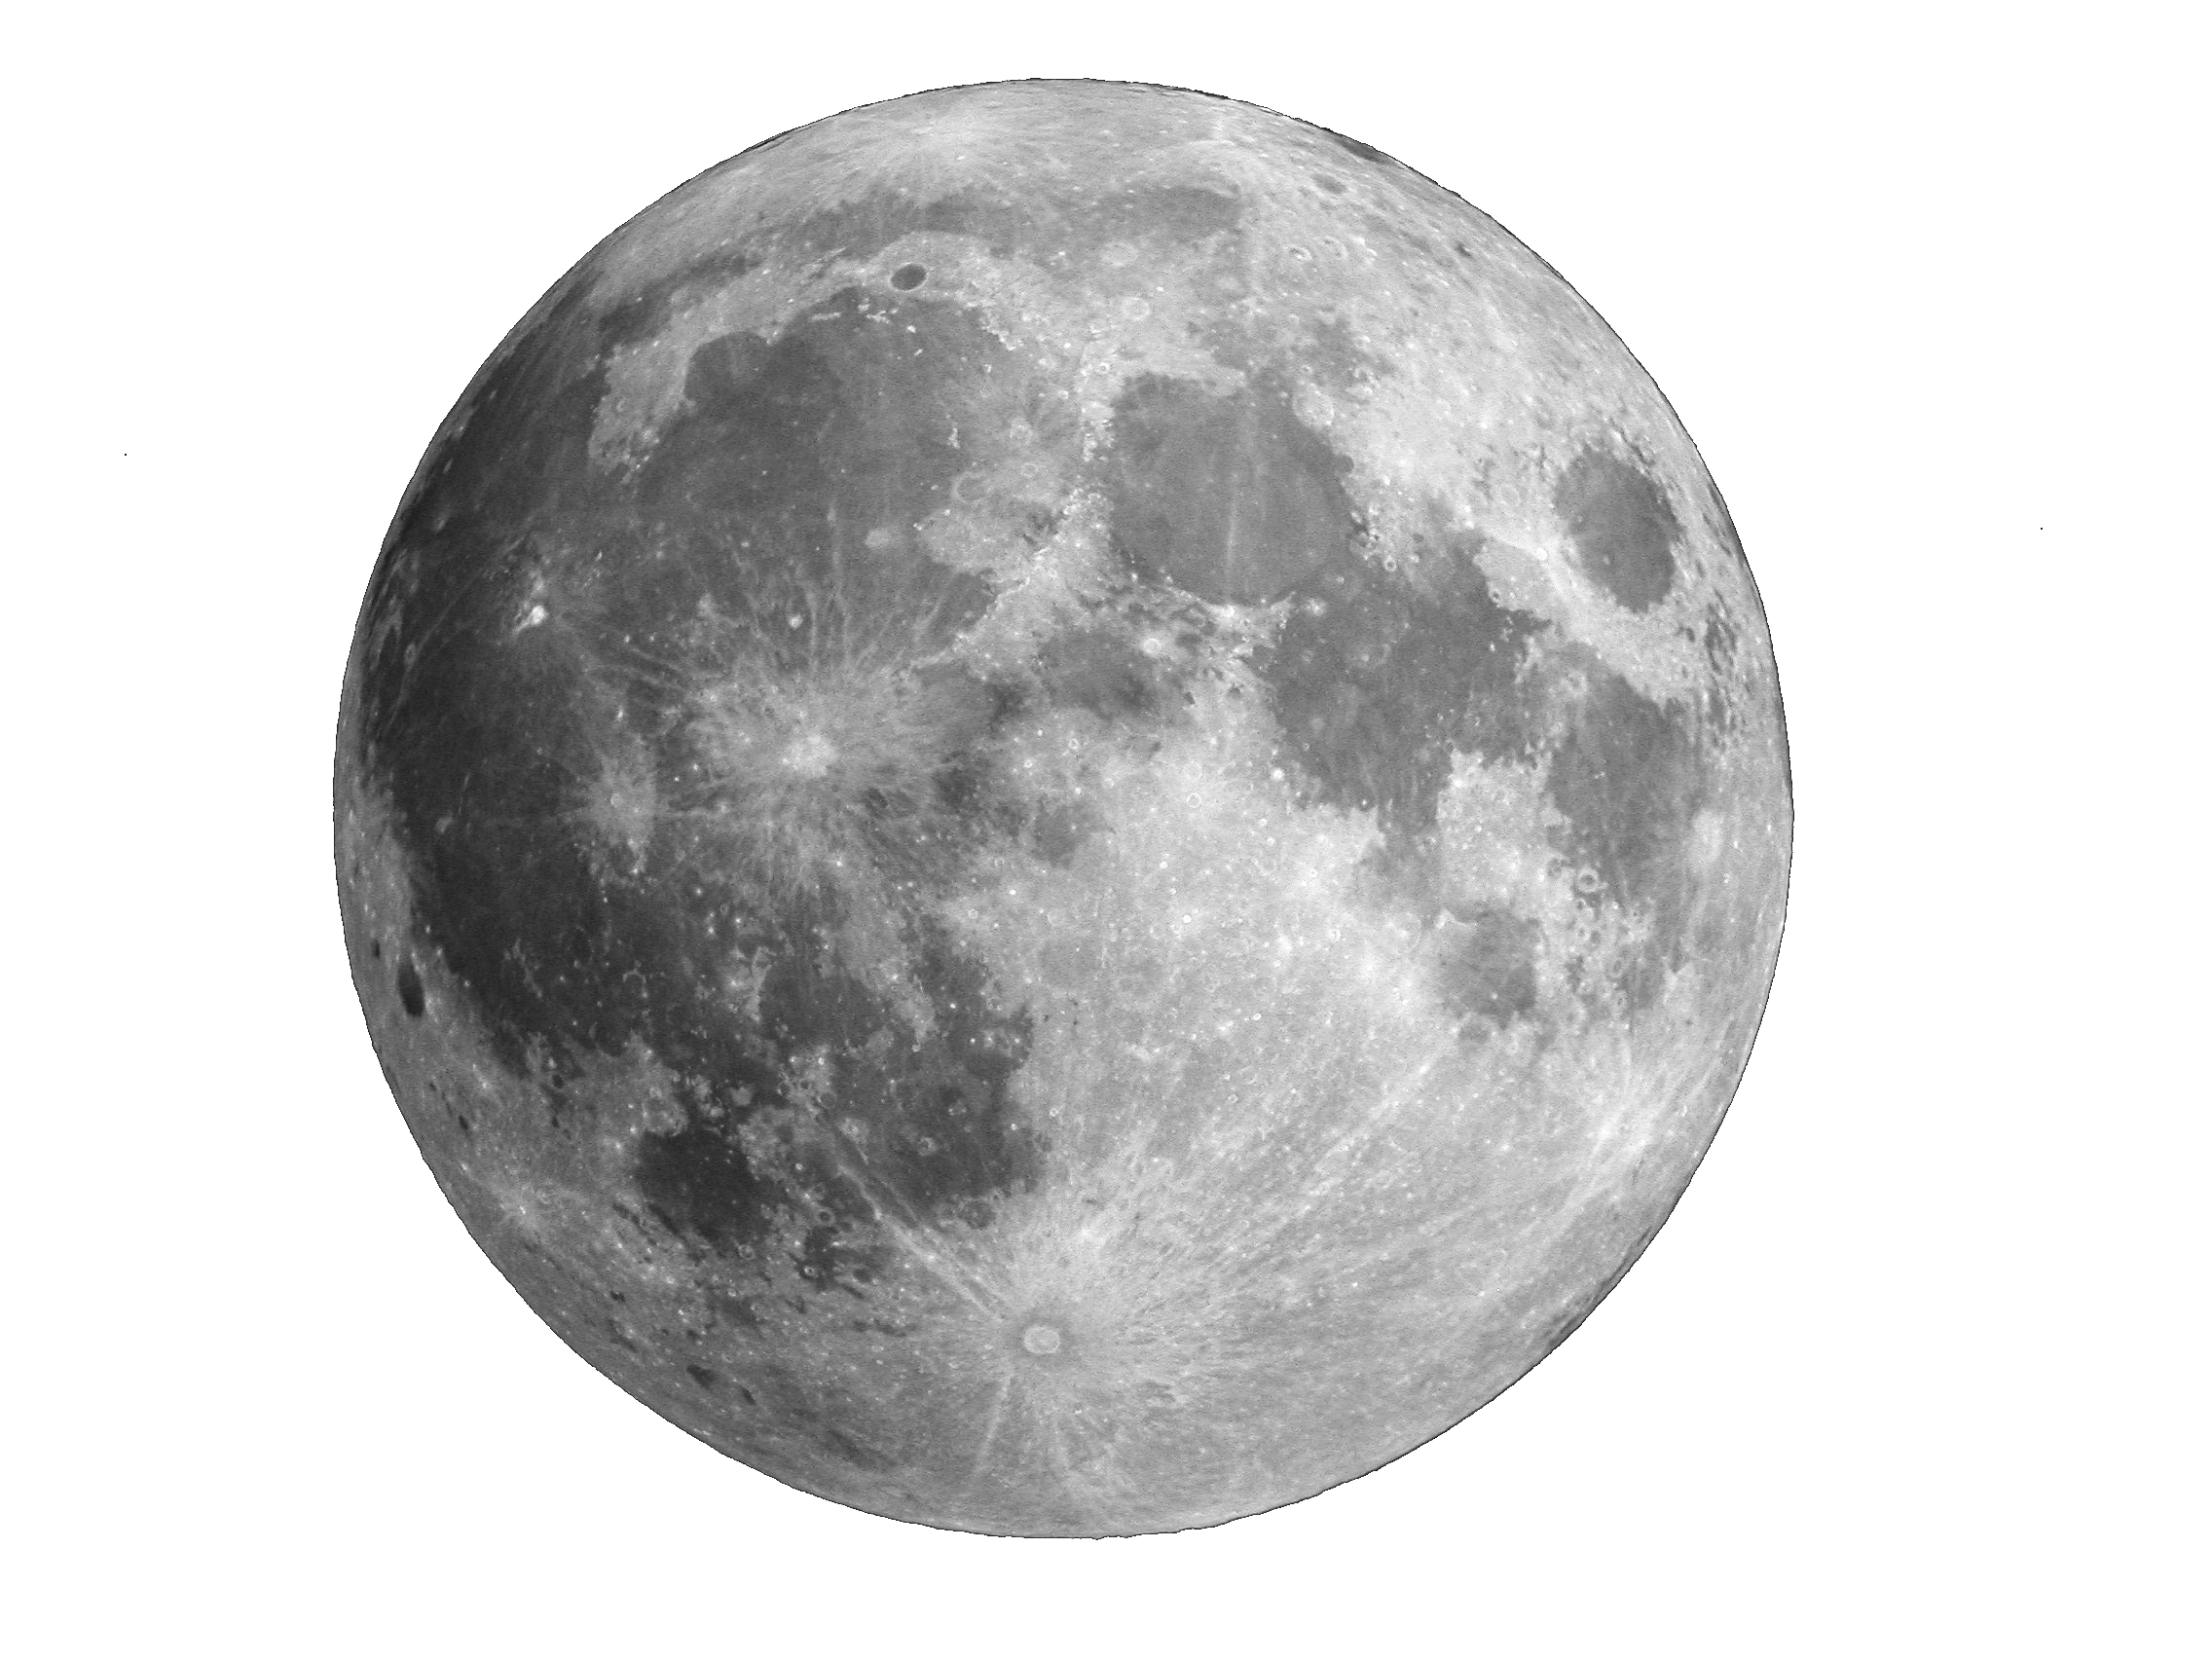 Image of a moon